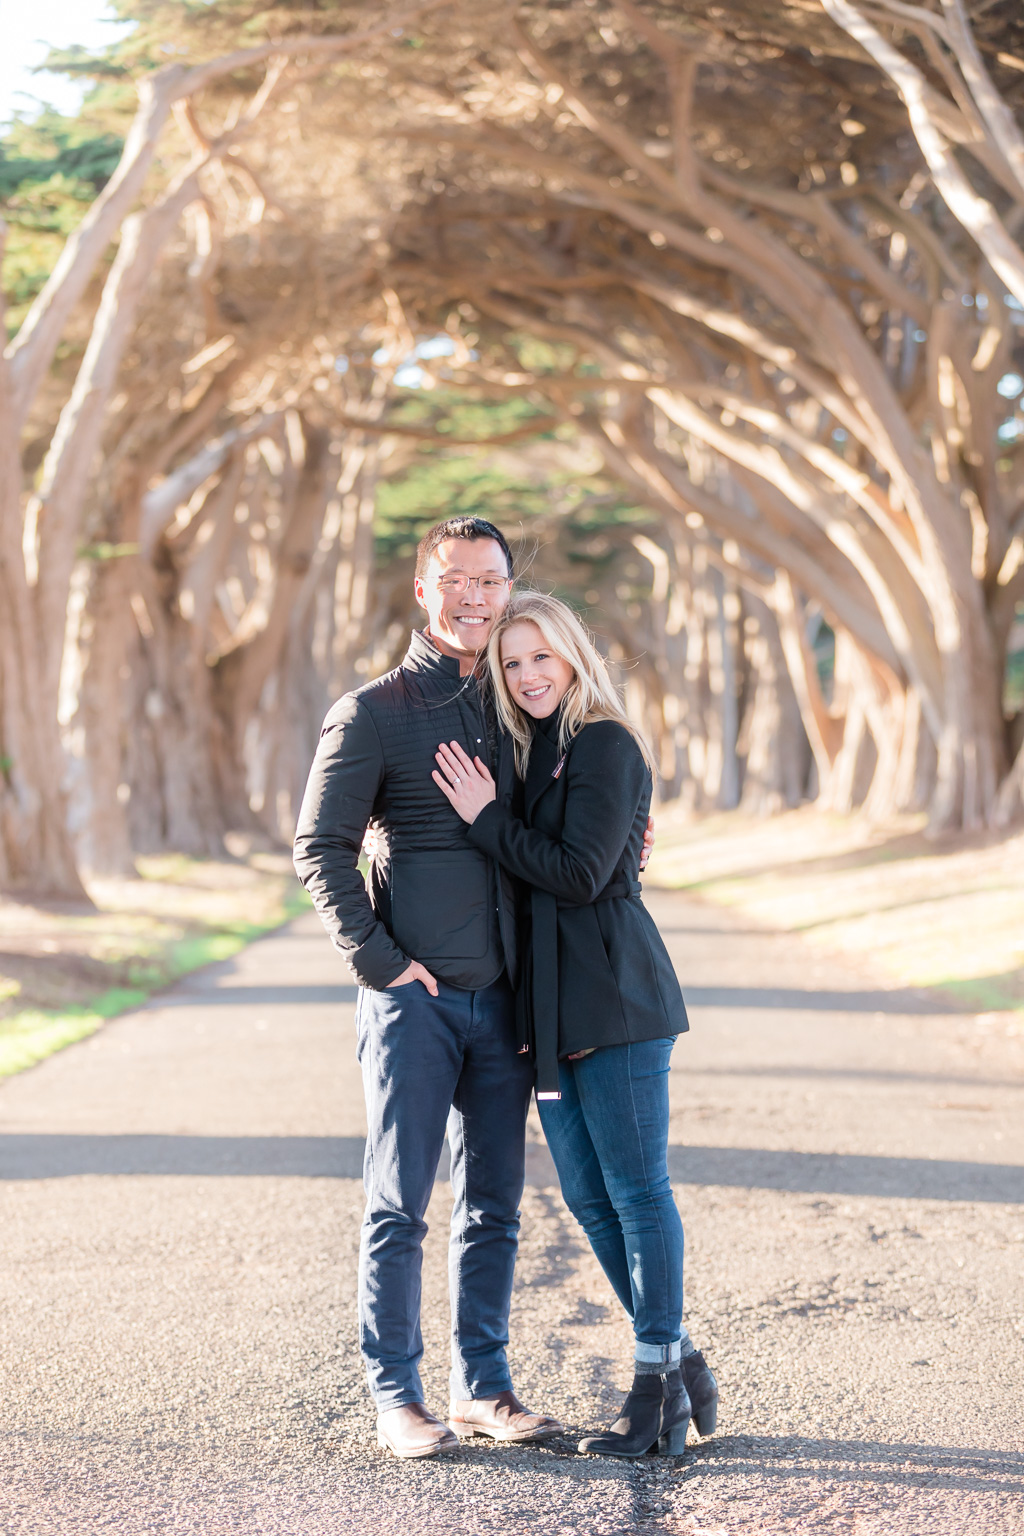 they got engaged under the cypress arch